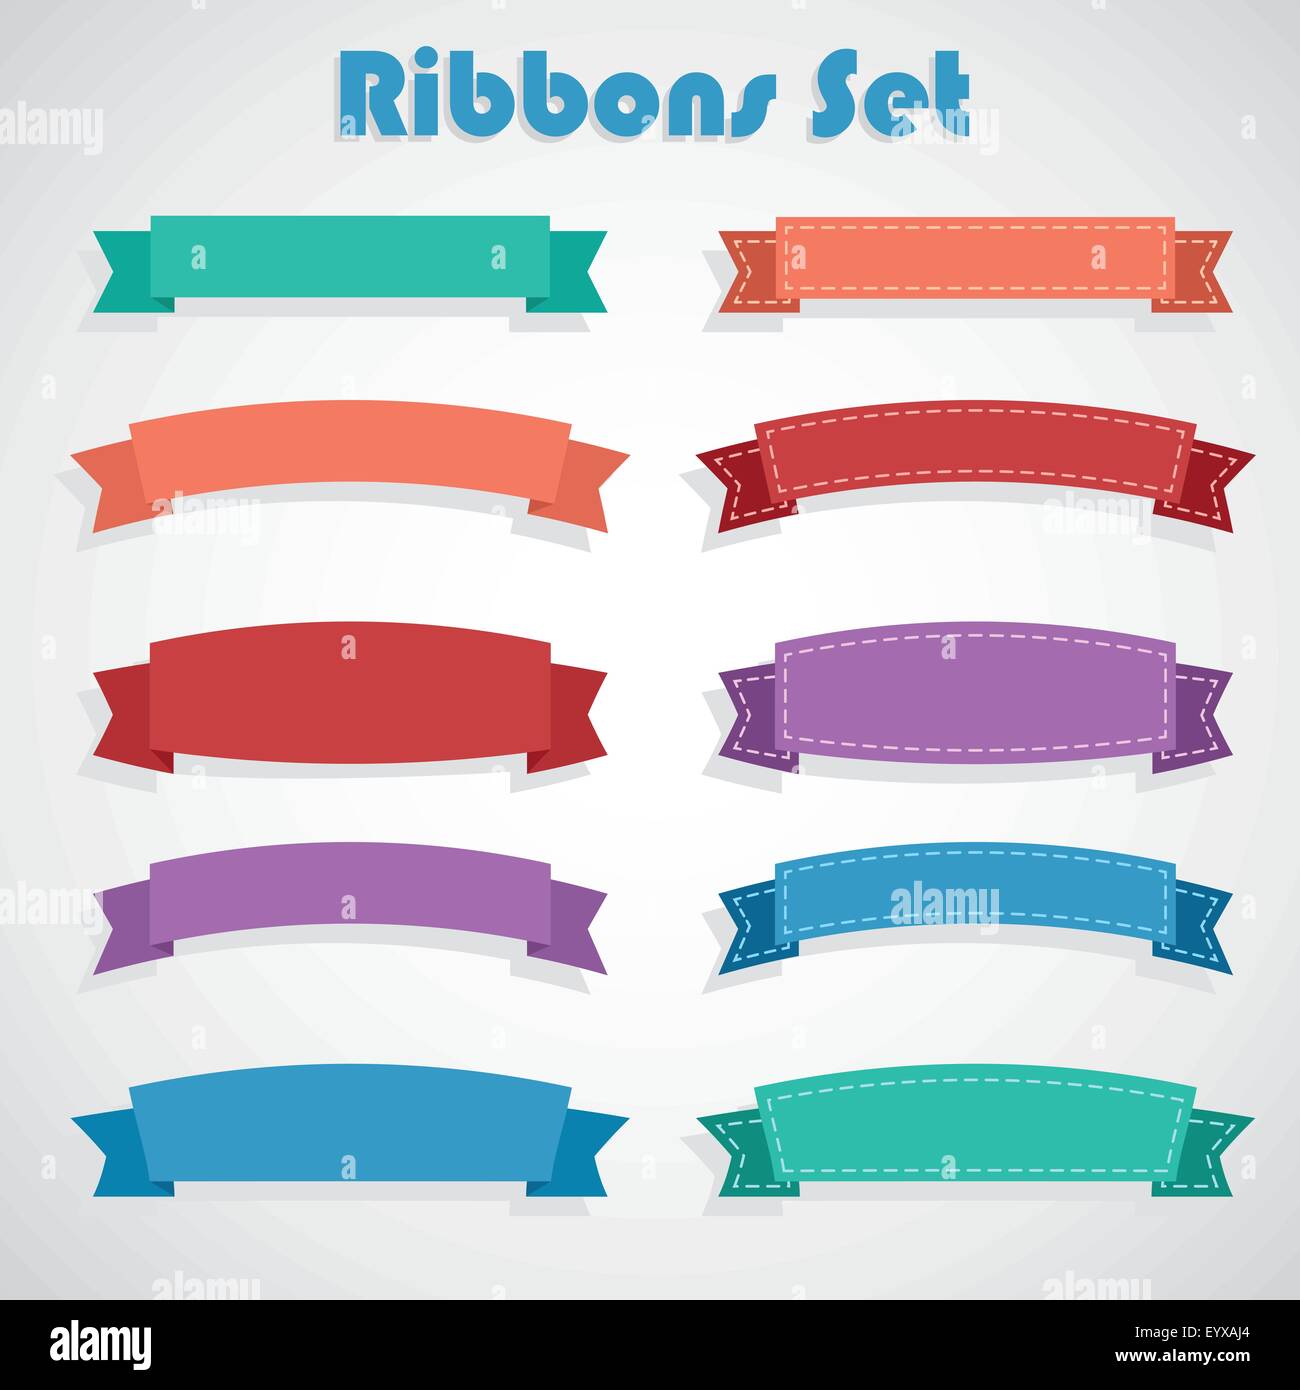 10 ribbons design set for web icons vector illustration. Stock Vector